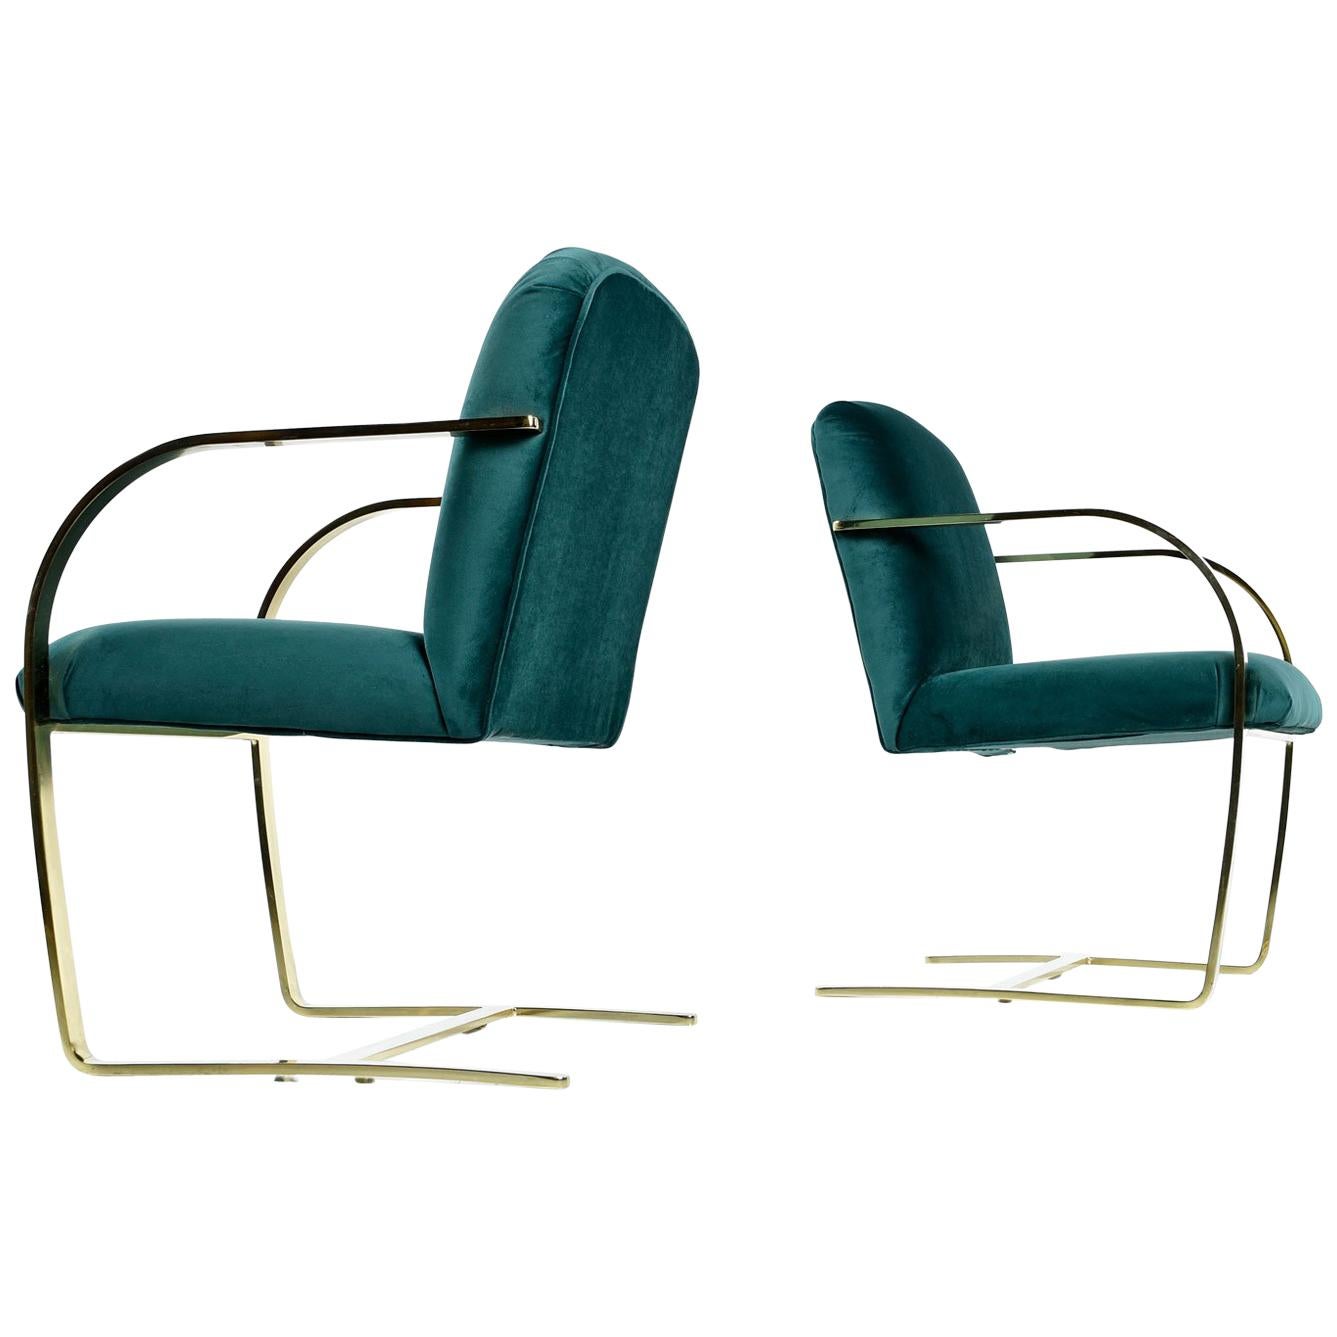 Yes these Hollywood Regency gems are vintage, but they’re not Milo Baughman or Mies van der Rohe BRNO chairs. They’re actually made by American of Martinsville, not Knoll. So what’s the difference? These are heavier duty, more comfortable and much